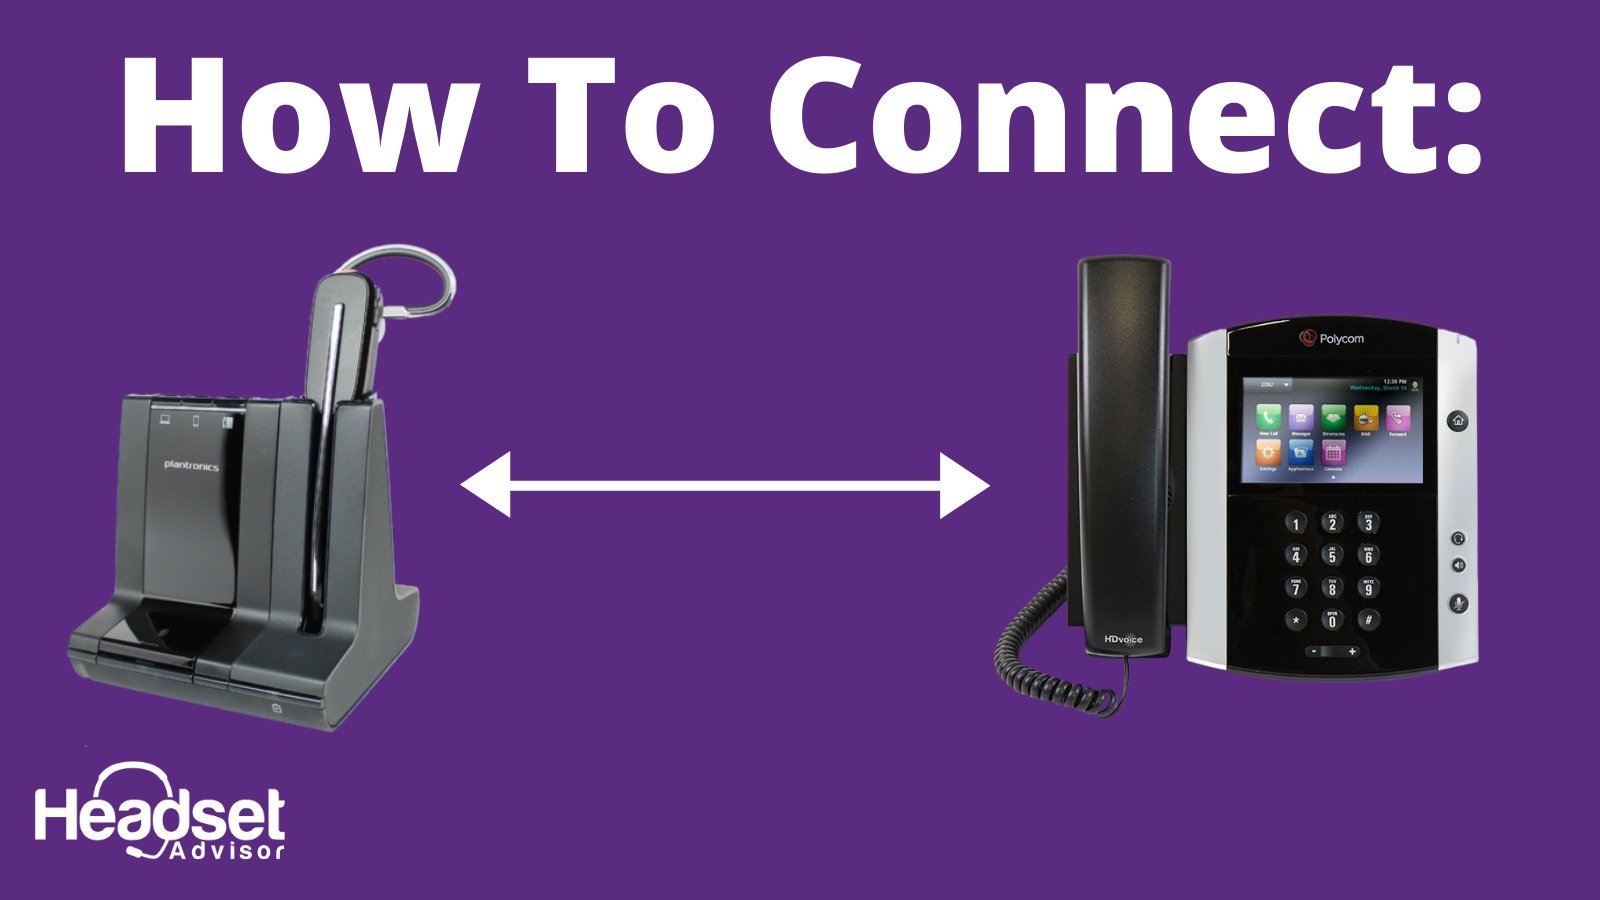 How to Connect Your Wireless Headset to an Office Phone - Headset Advisor